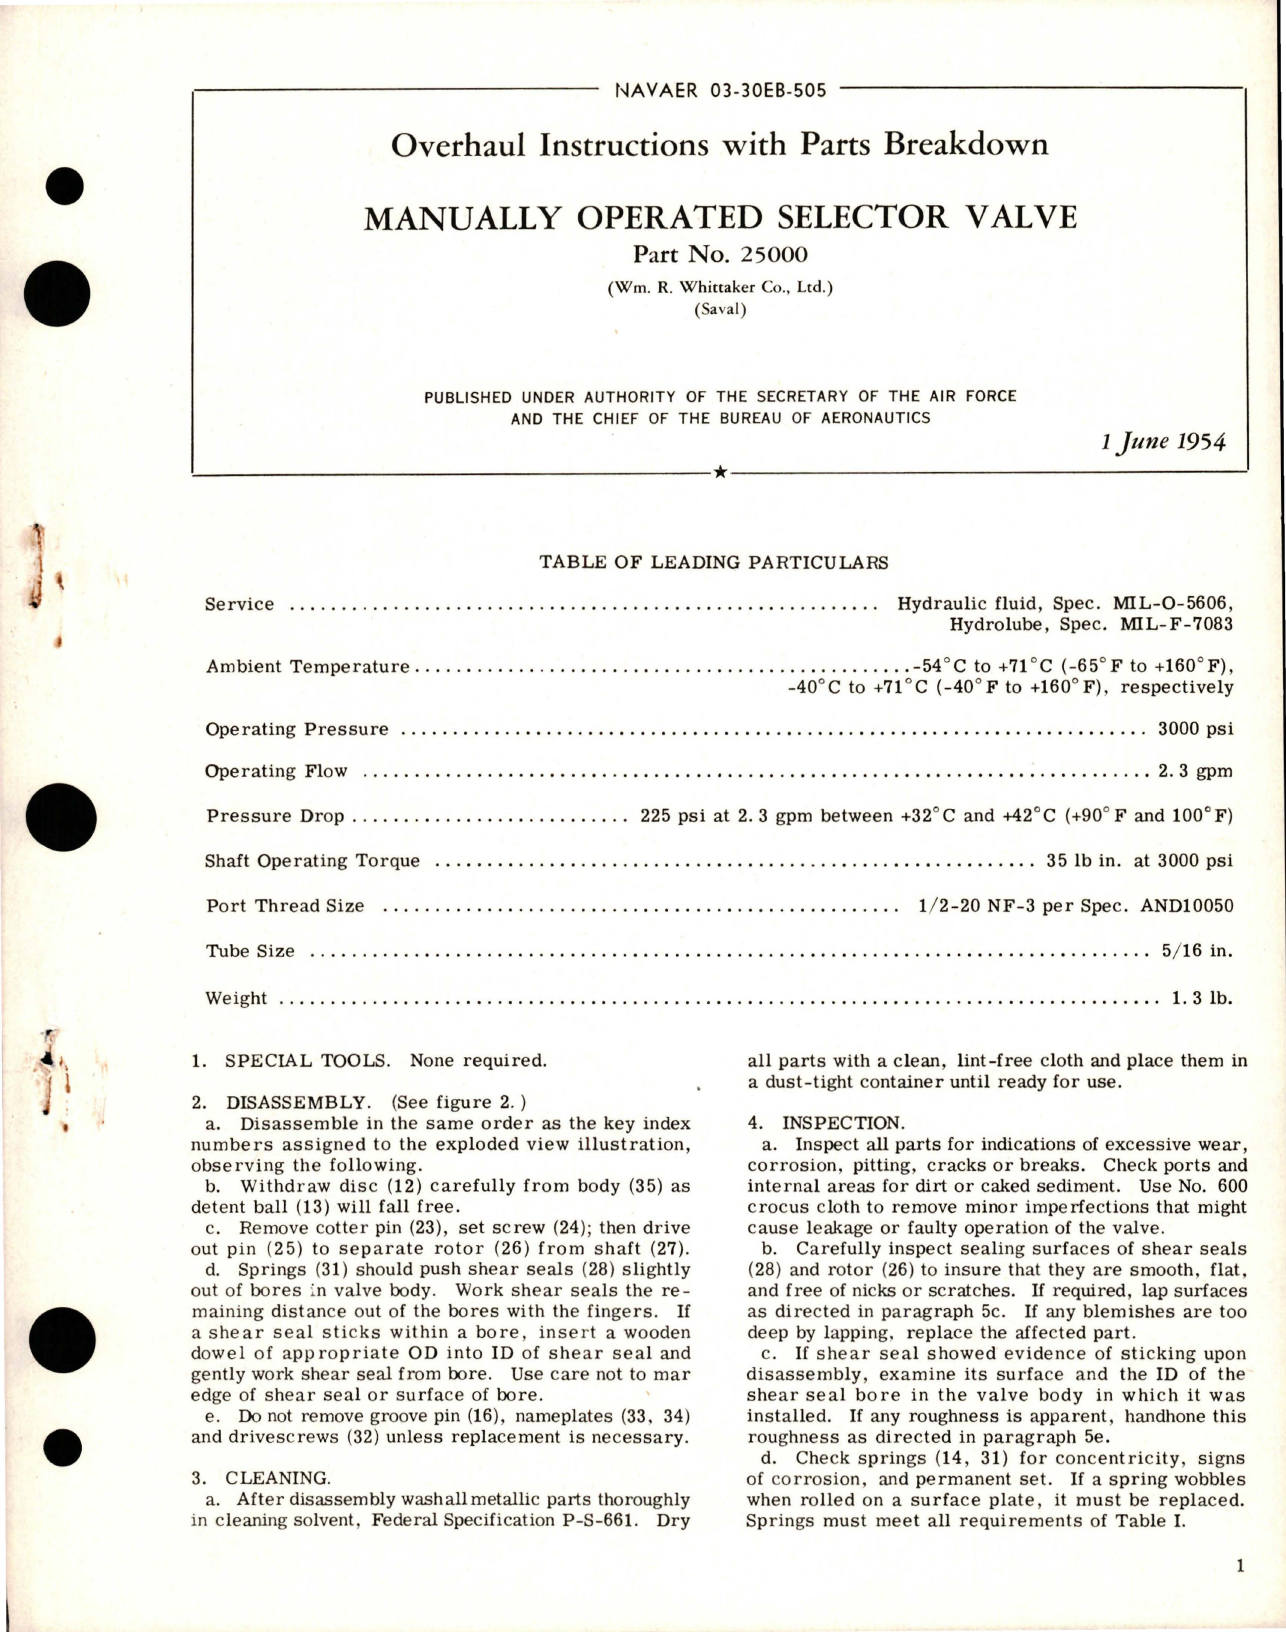 Sample page 1 from AirCorps Library document: Overhaul Instructions with Parts Breakdown for Manually Operated Selector Valve - Part 25000